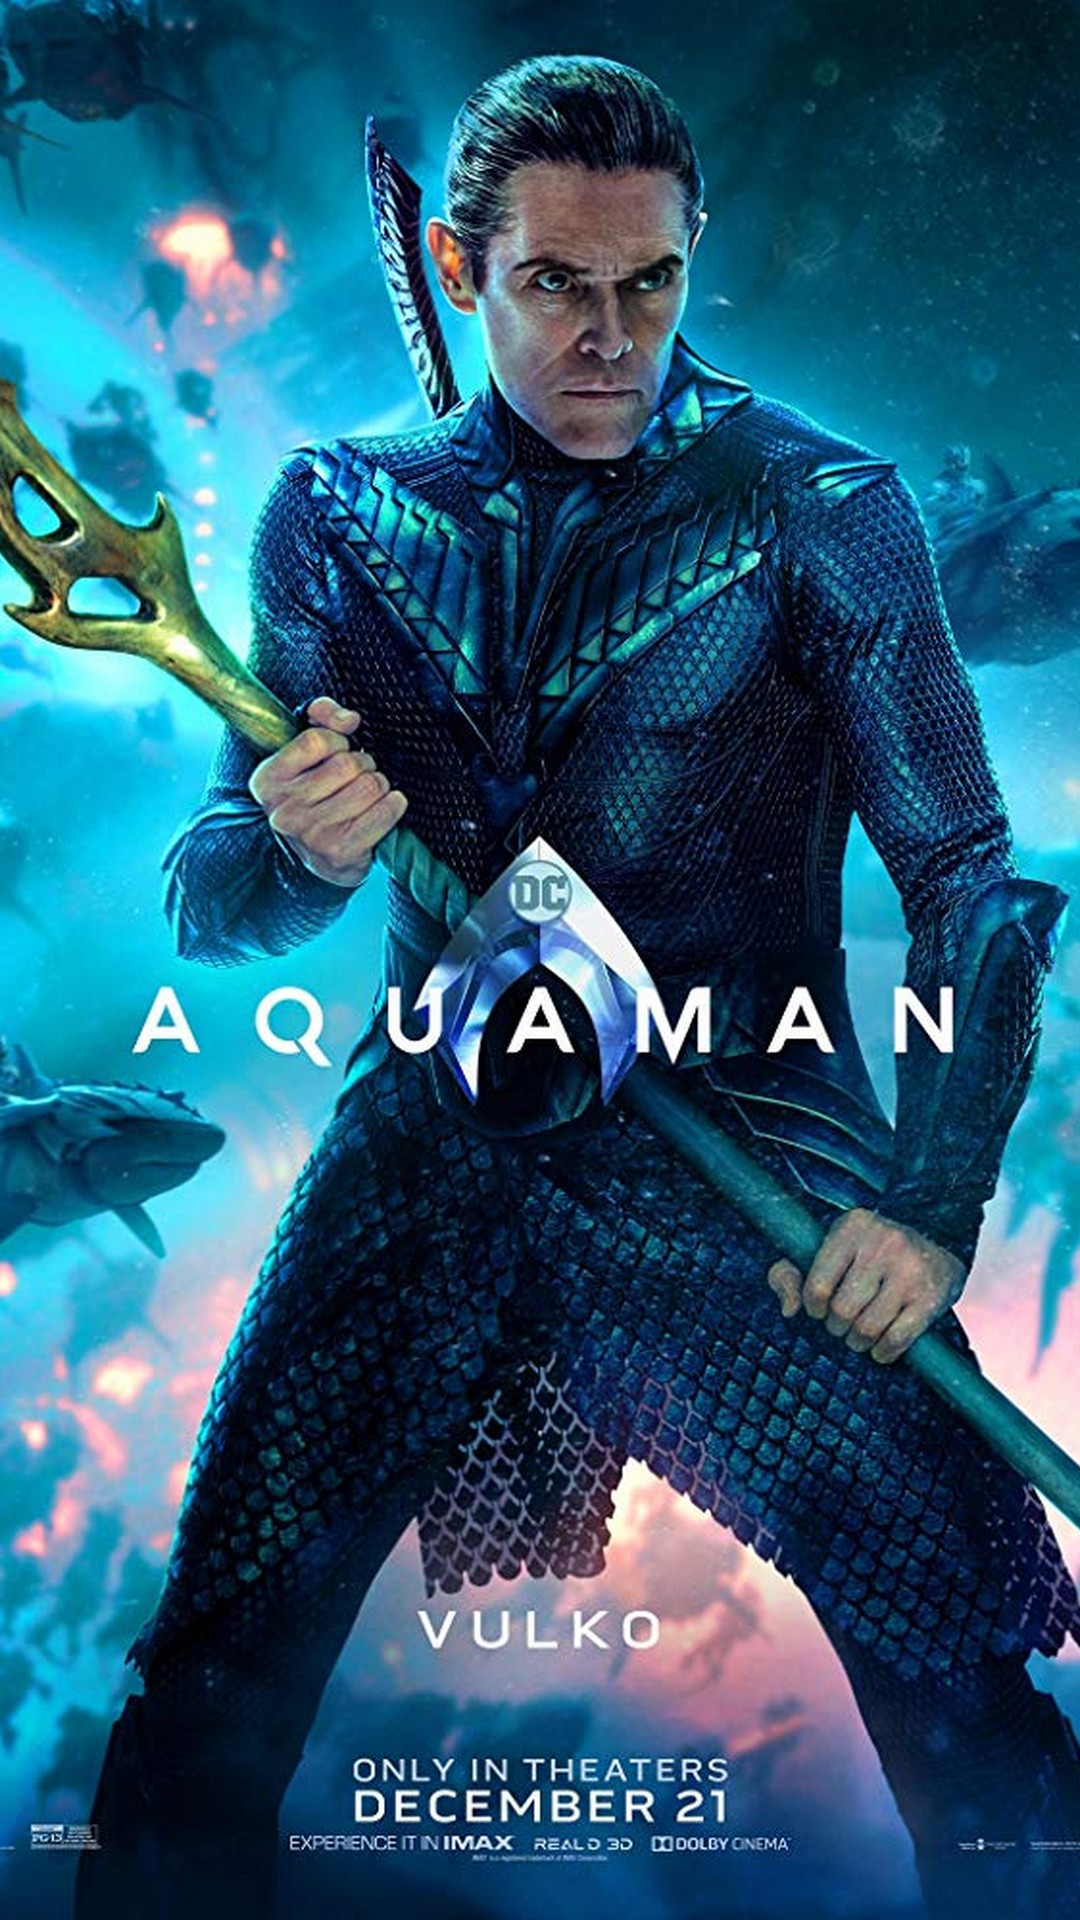 Aquaman iPhone Wallpaper with resolution 1080X1920 pixel. You can make this wallpaper for your iPhone 5, 6, 7, 8, X backgrounds, Mobile Screensaver, or iPad Lock Screen